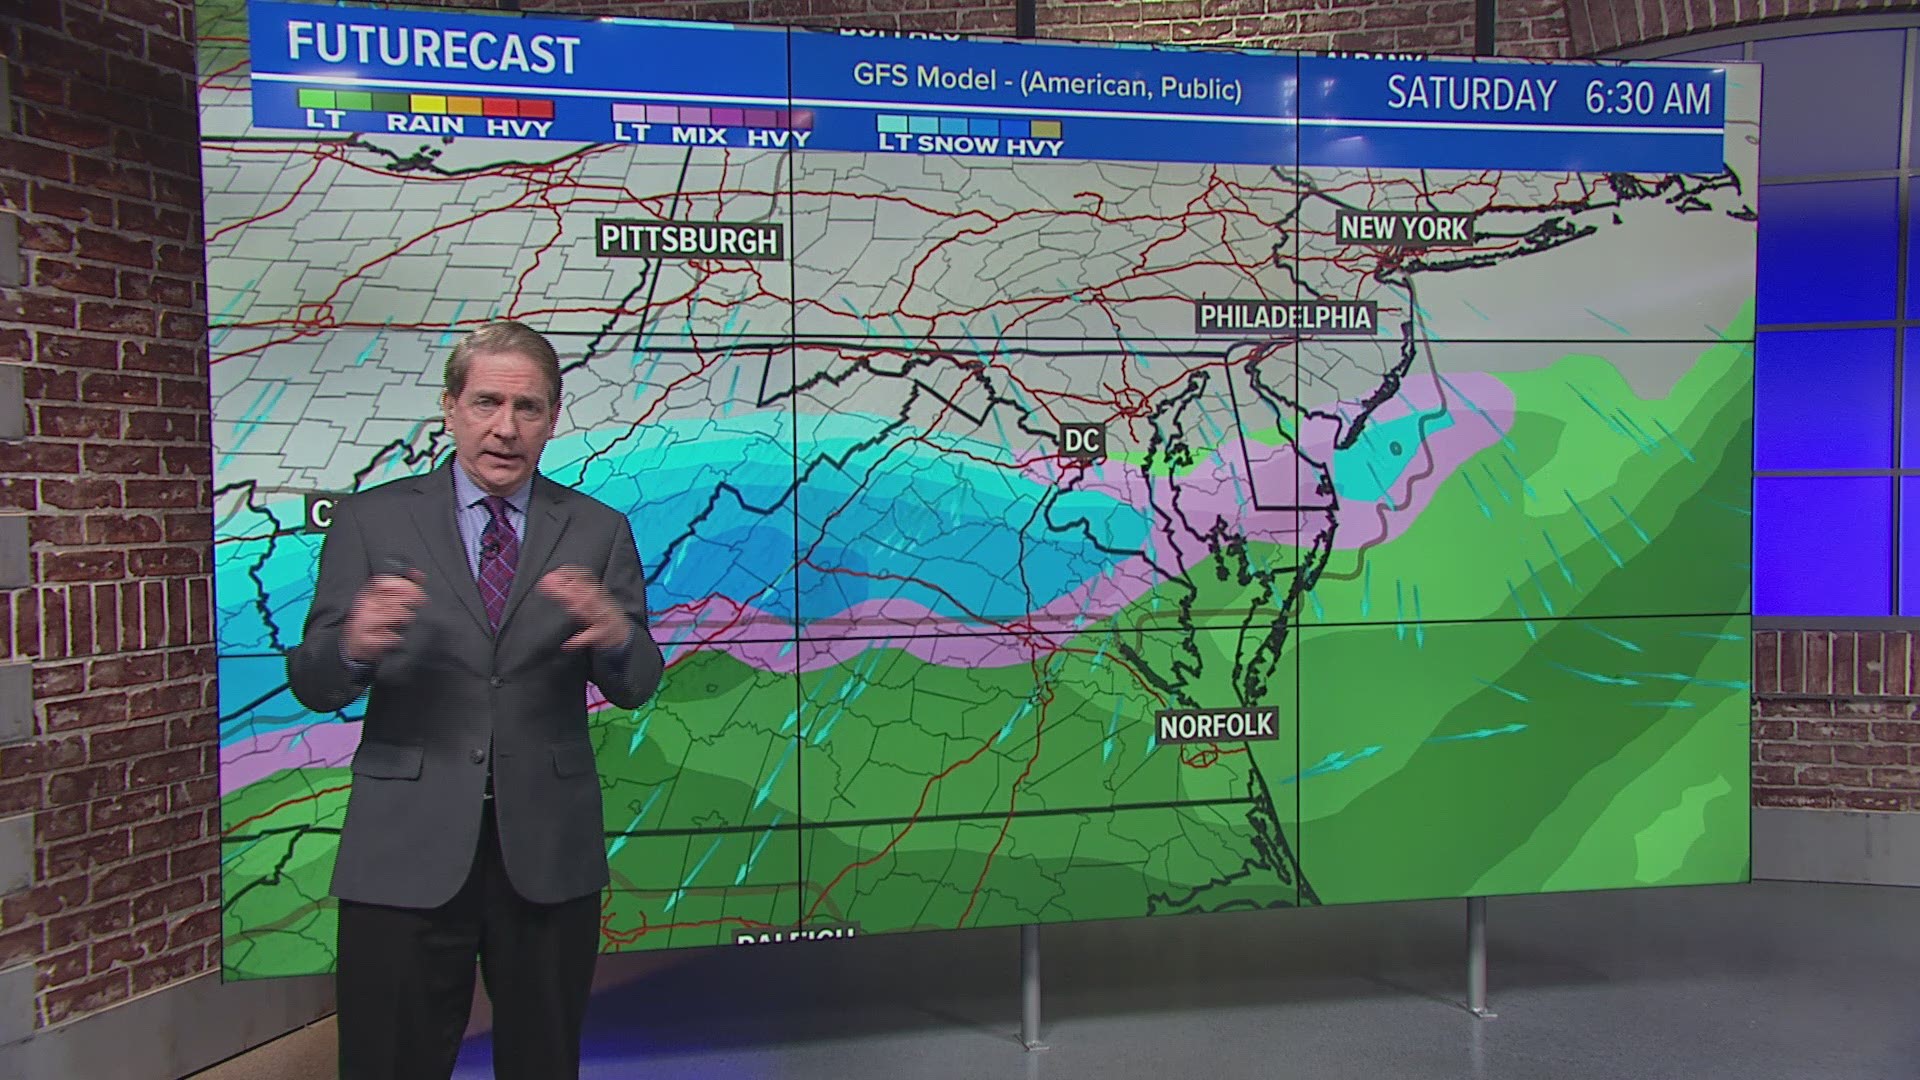 Snow and a mix are possible Saturday, mainly south of DC with light rain possible late Sunday. Rain and a wintry mix, including freezing rain are possible Tuesday night - Wednesday